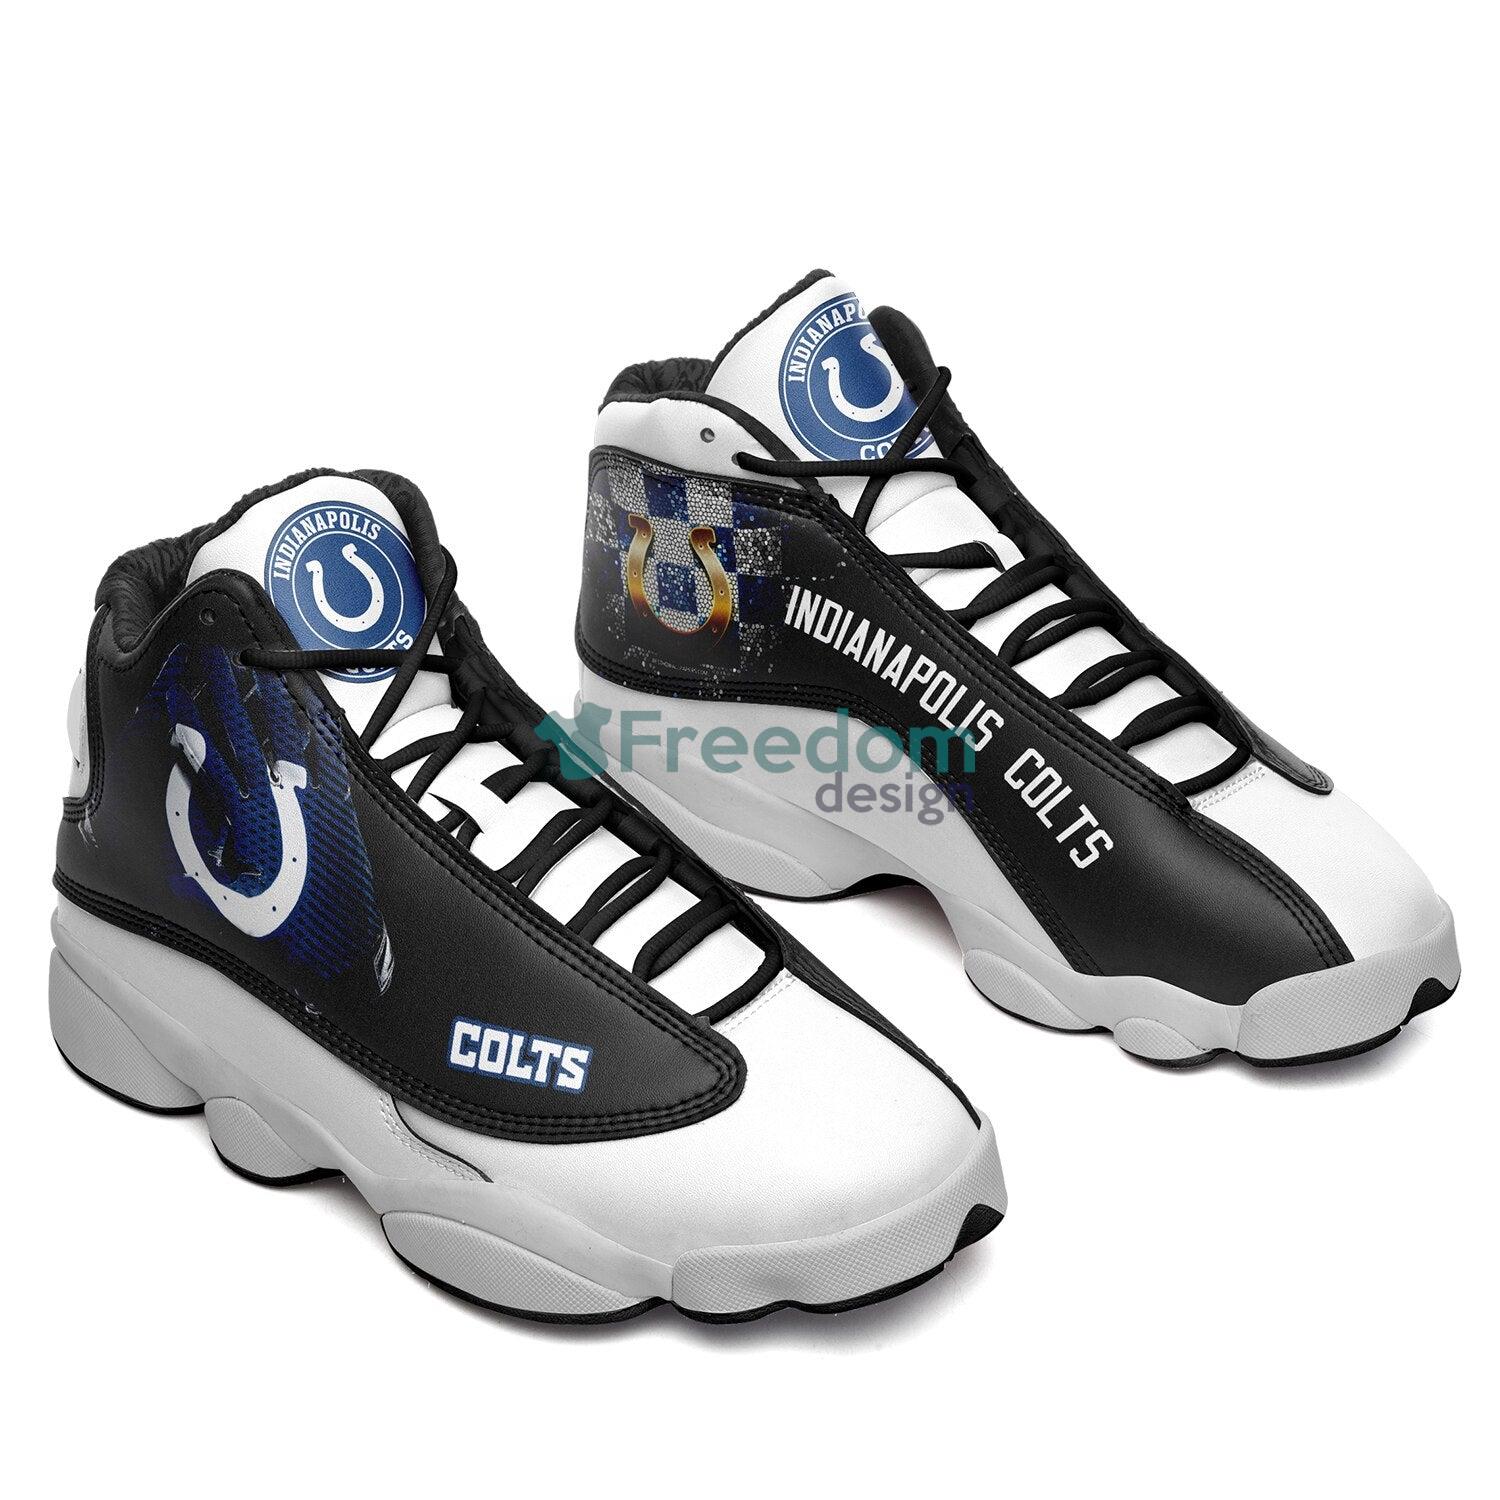 Indianapolis Colts Team Lover Air Jordan 13 Sneaker Shoes For Fans